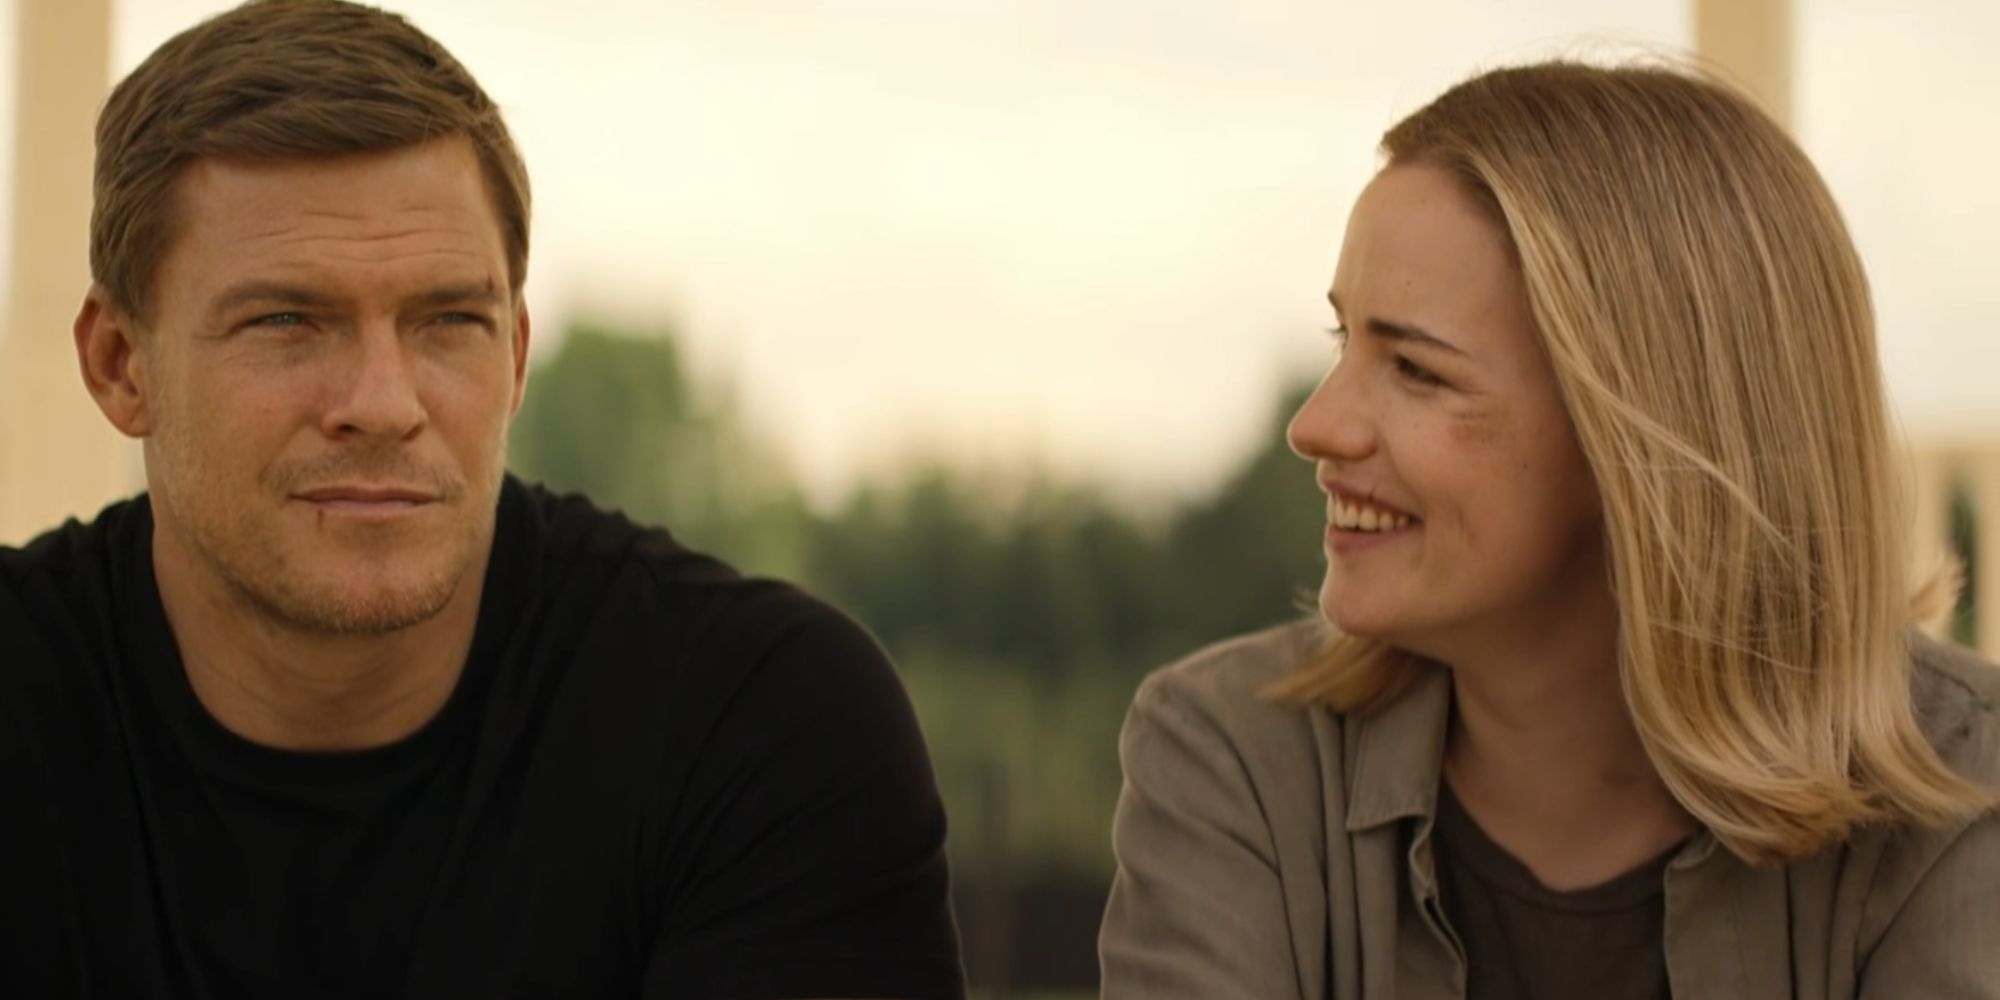 A smiling Willa Fitzgerald as Roscoe Conklin looking at Alan Ritchson as Reacher.